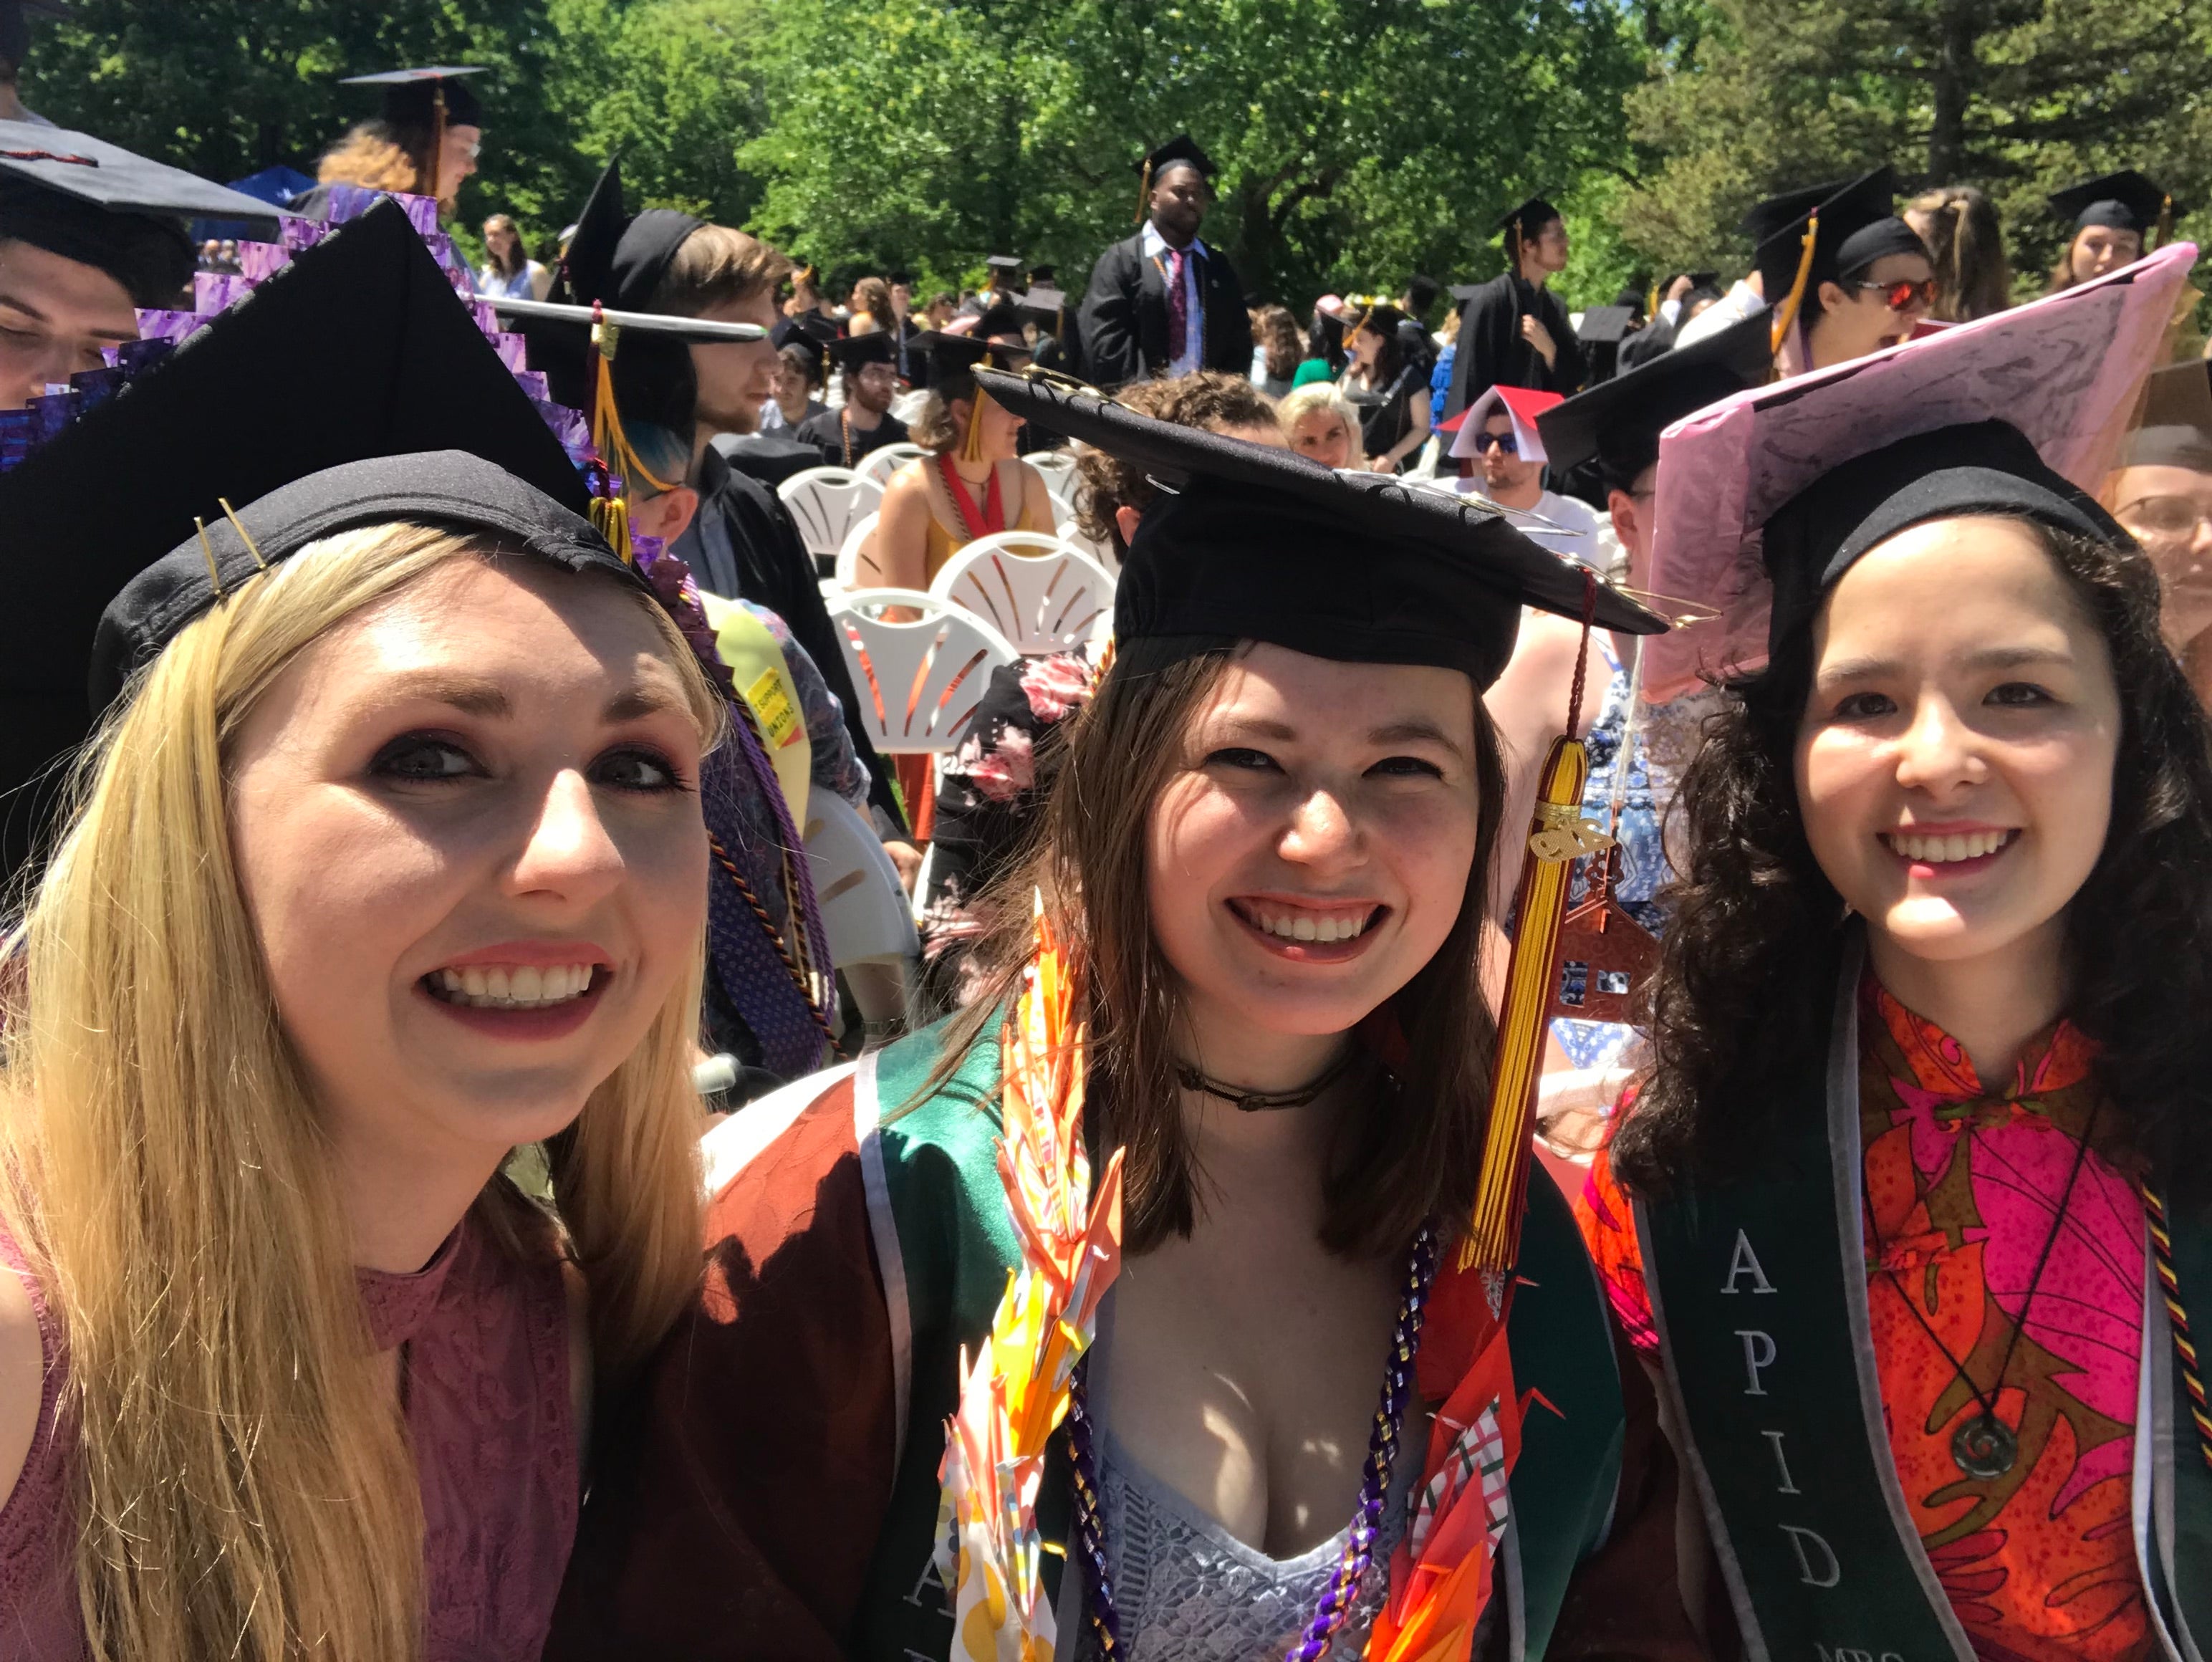 Three women wearing graduation caps. One is blond with purple on her cap, the other is brunette and wears a necklace made of paper cranes, and the other has curly brown hair and is wearing a pink cap and dress.